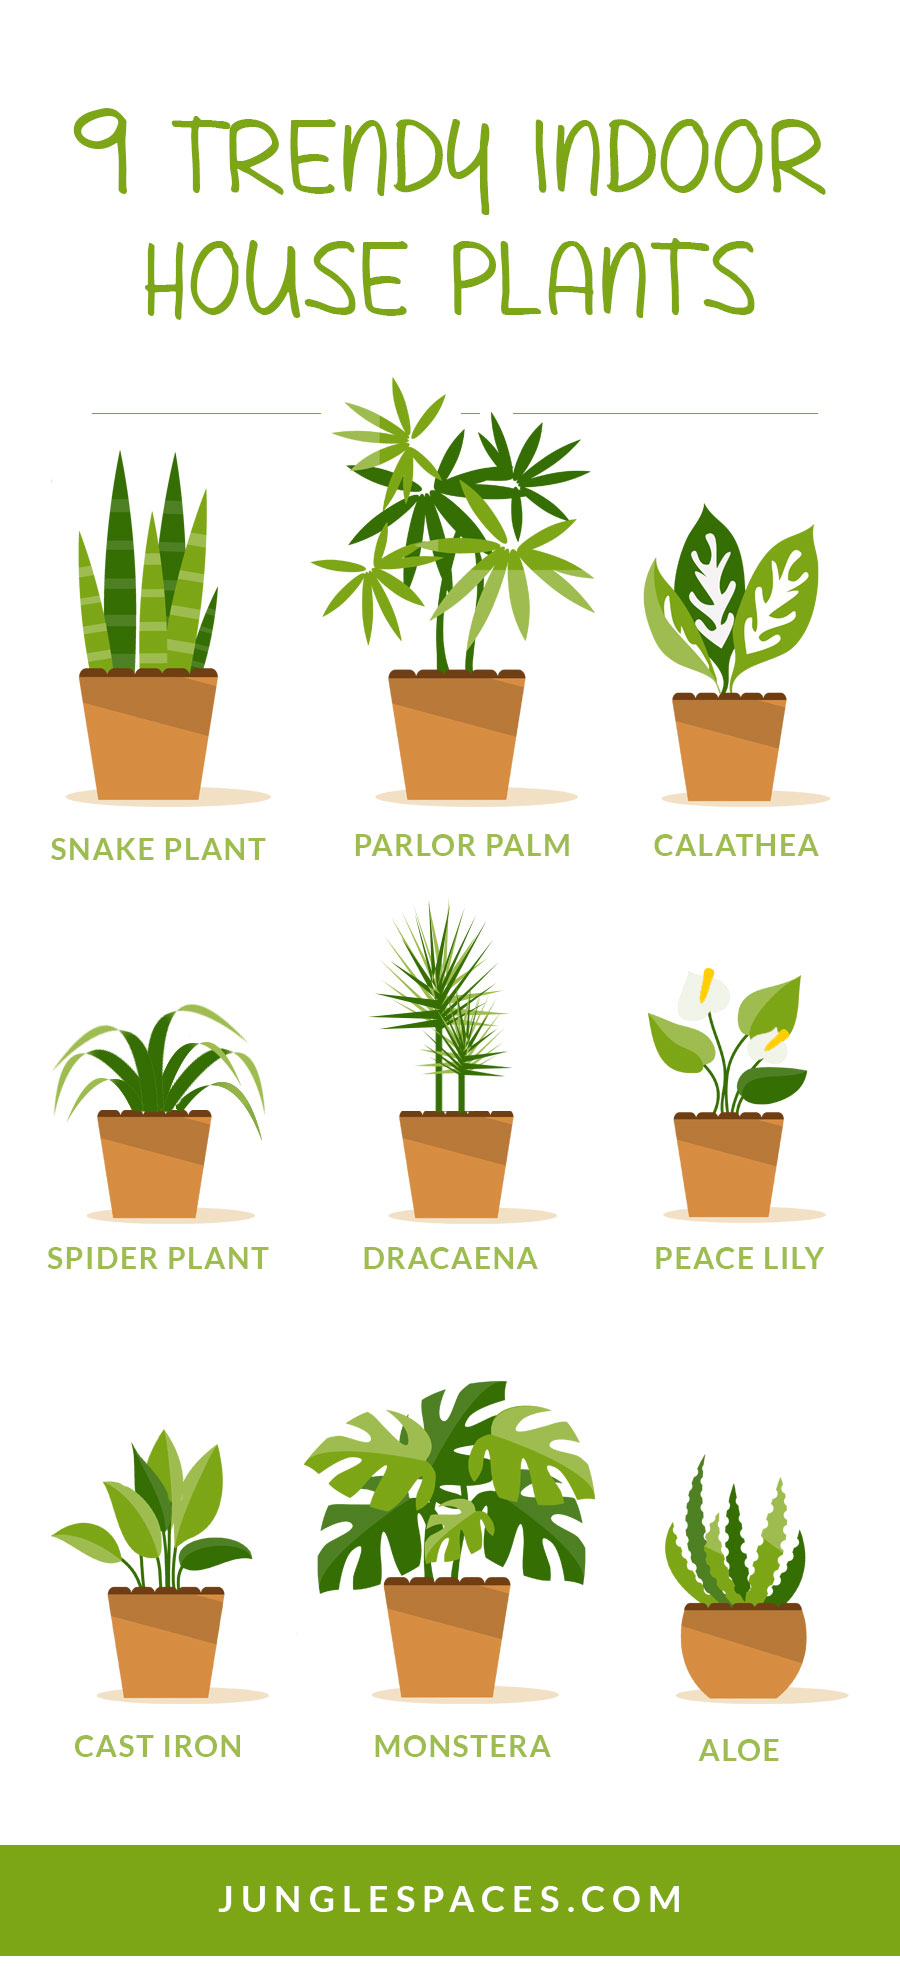 9 Trendy Houseplants That Don't Need Direct Sunlight